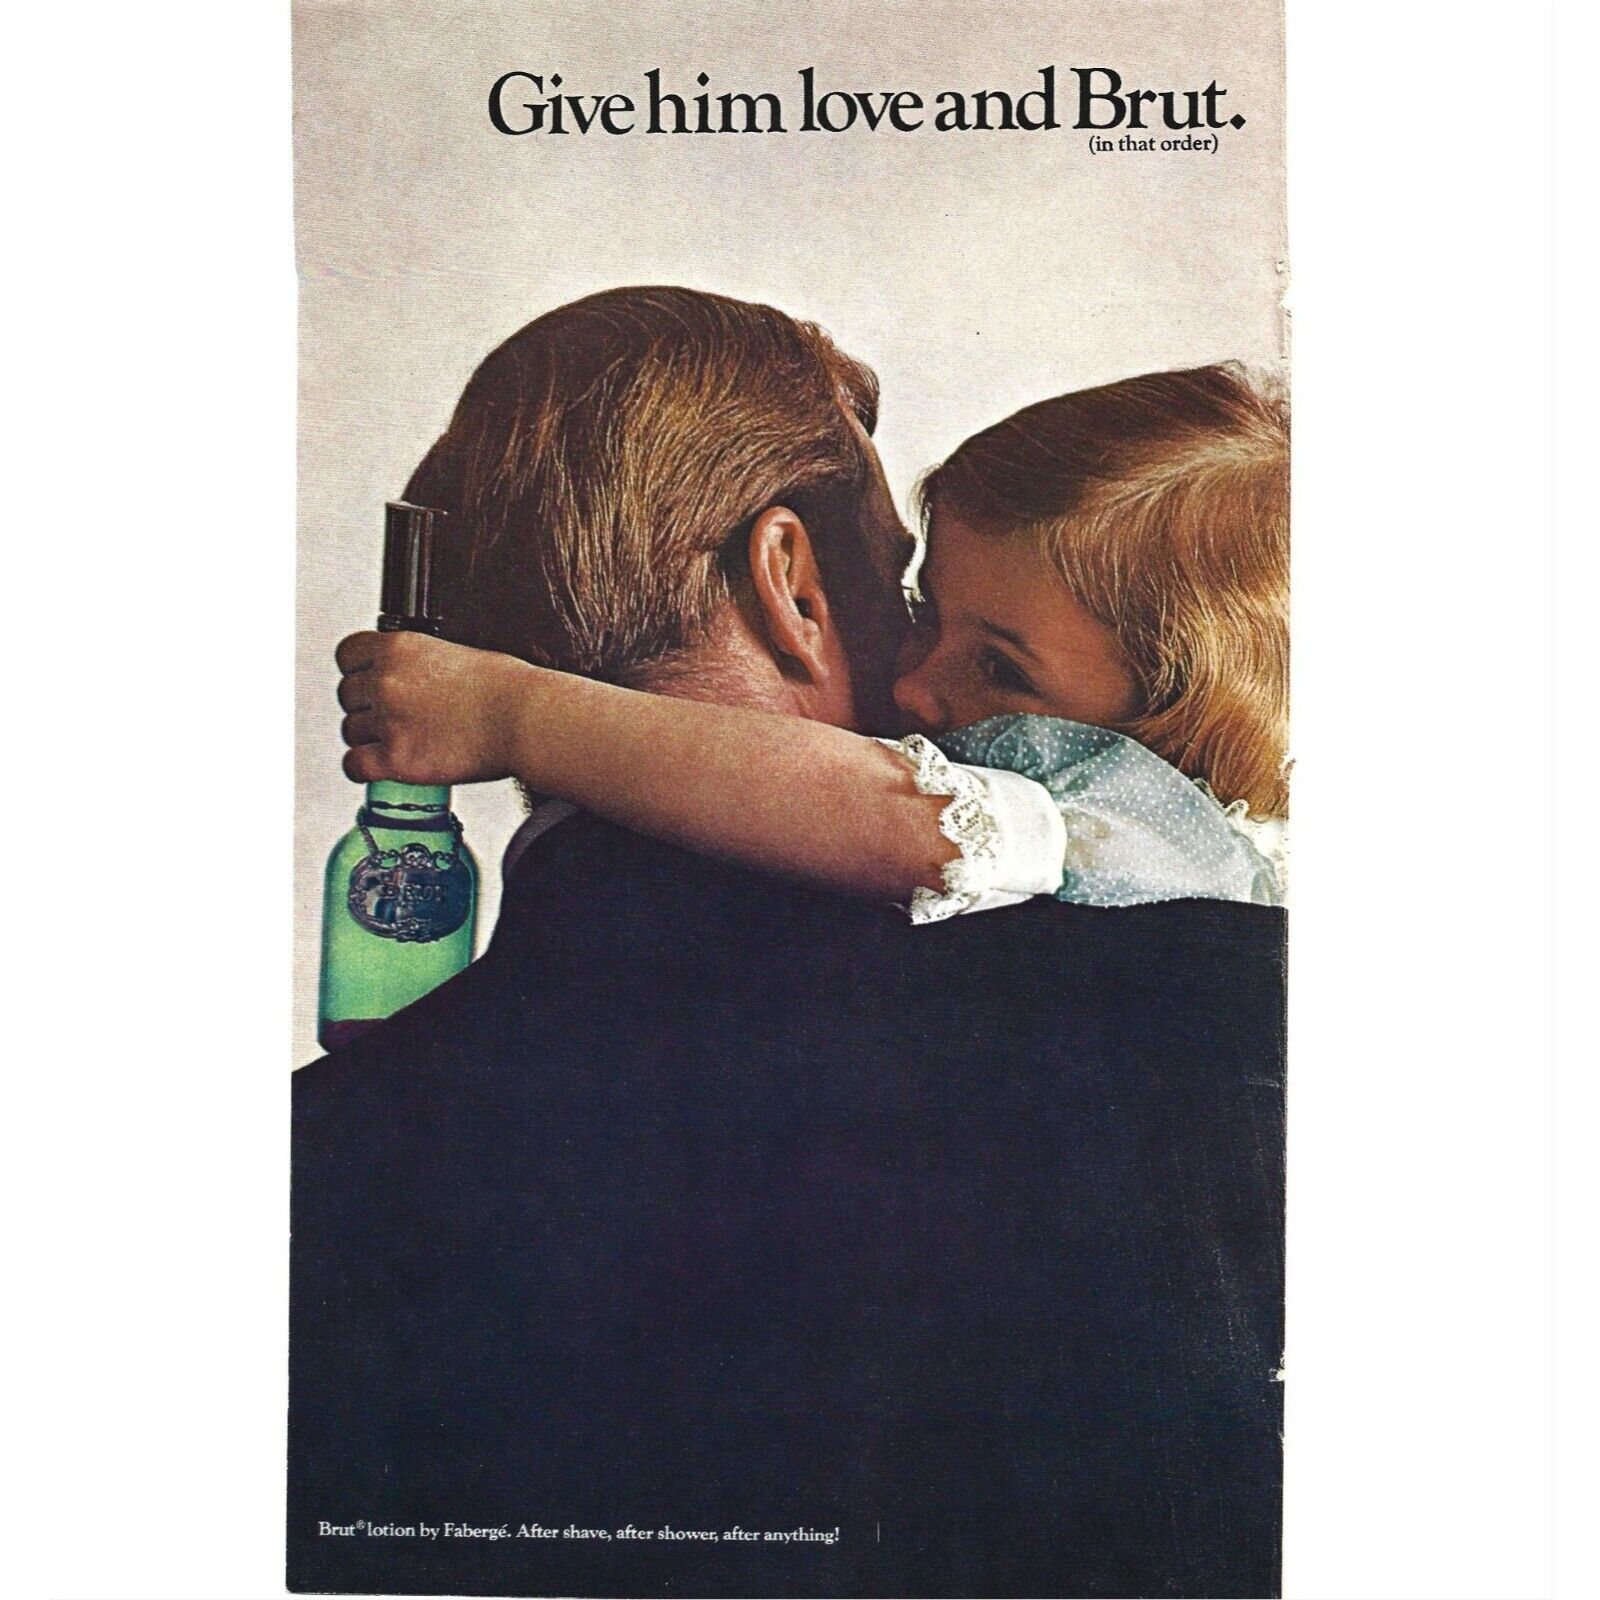 Give Him Love an Brut Lotion Faberge 1980s Vintage Print Ad 9 inch